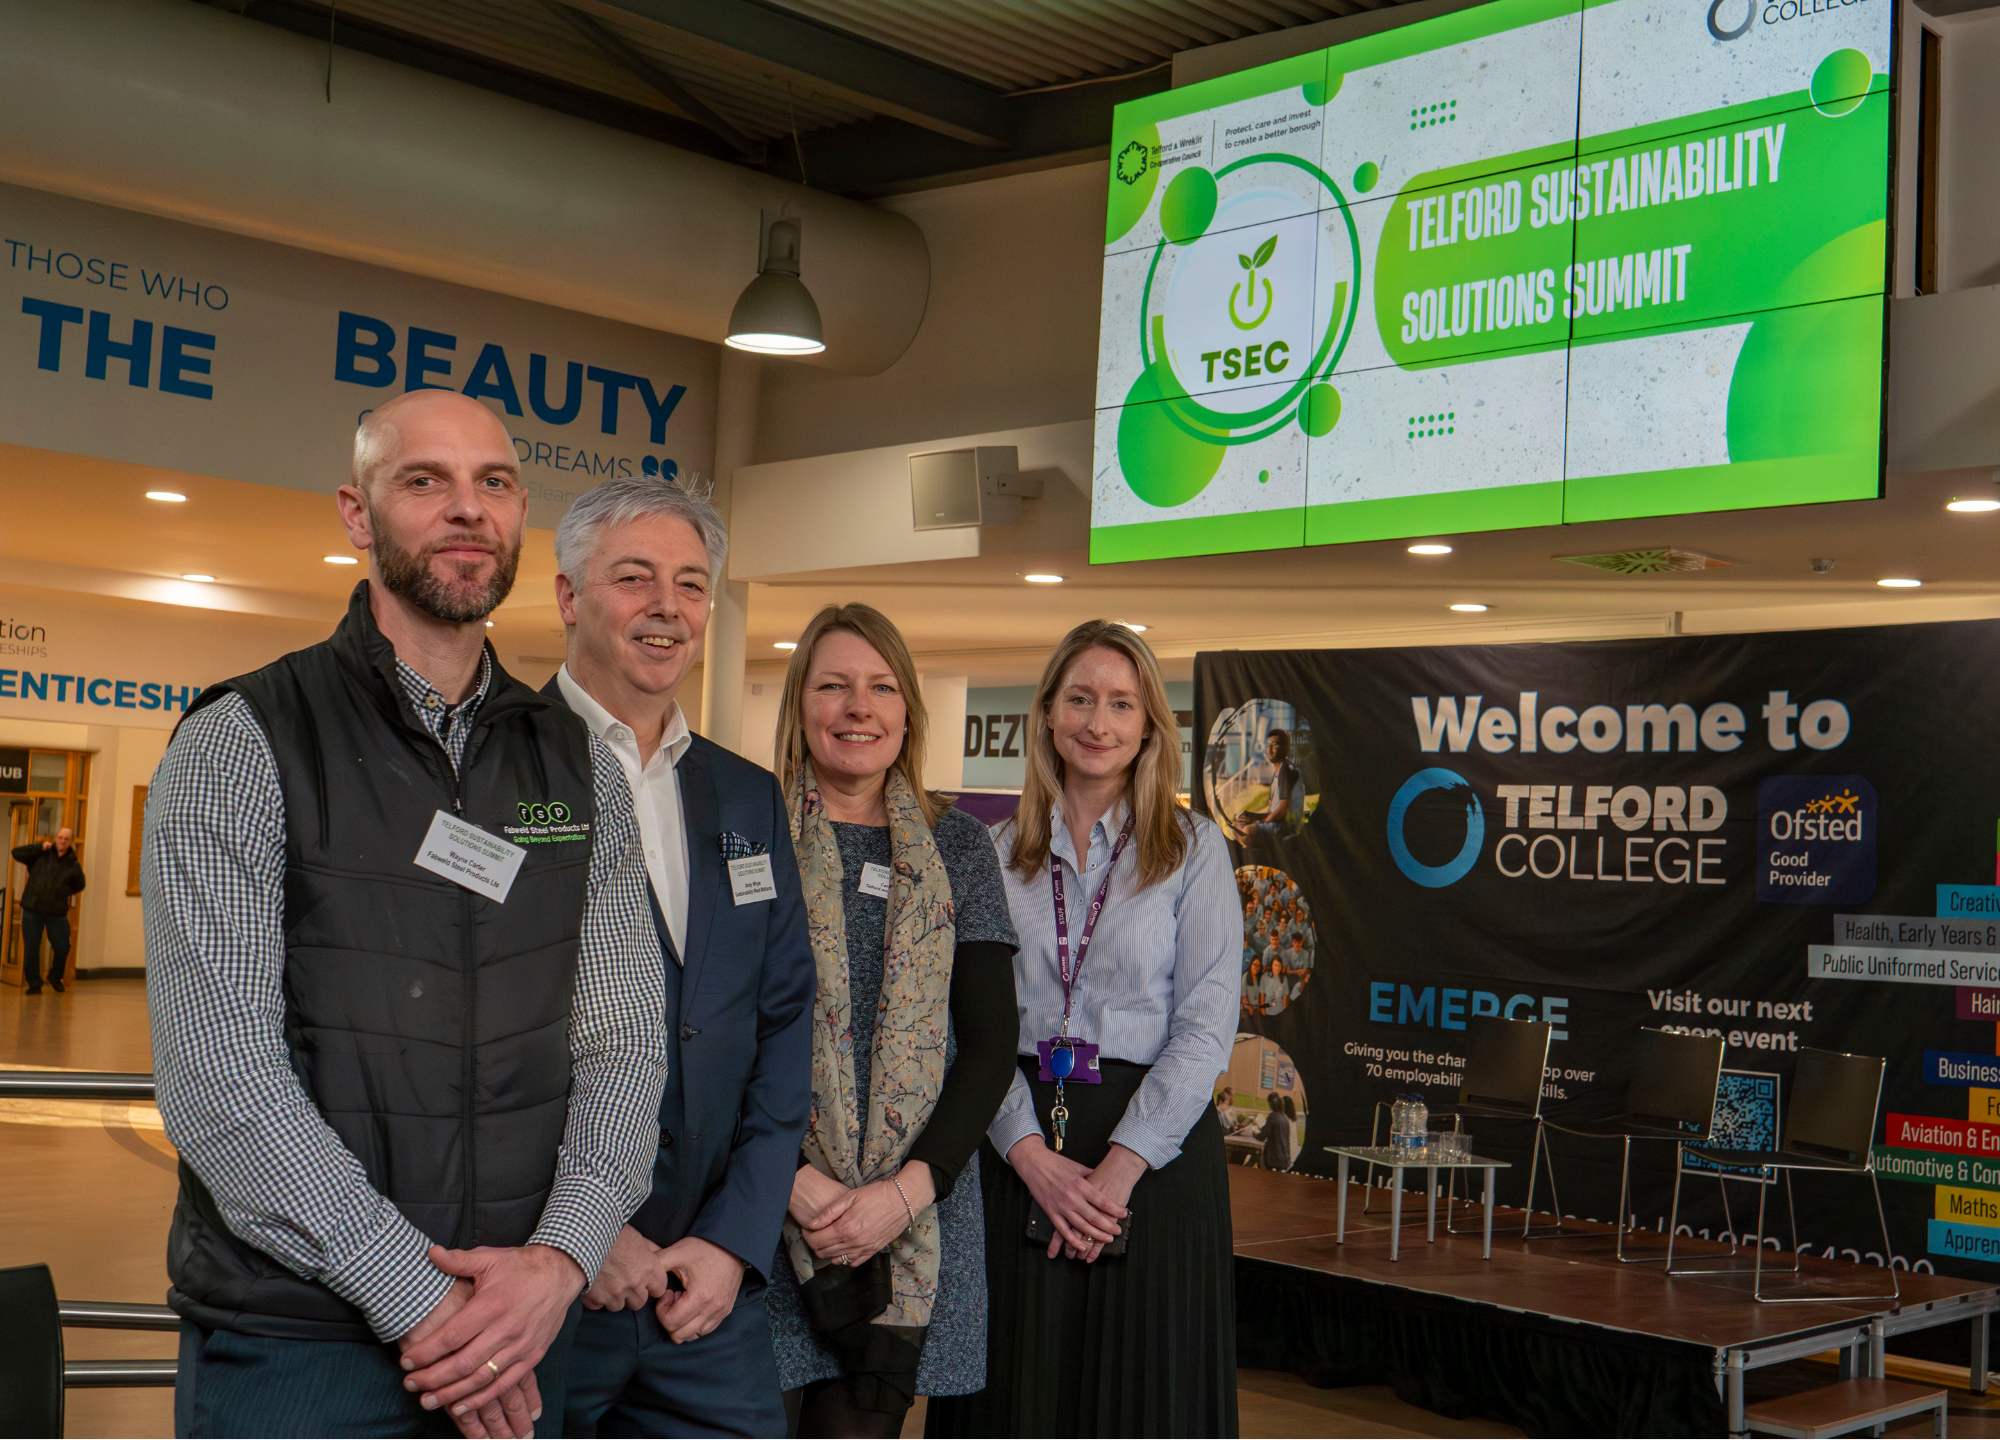 Telford businesses connect and collaborate at Telford Sustainability Solutions Summit